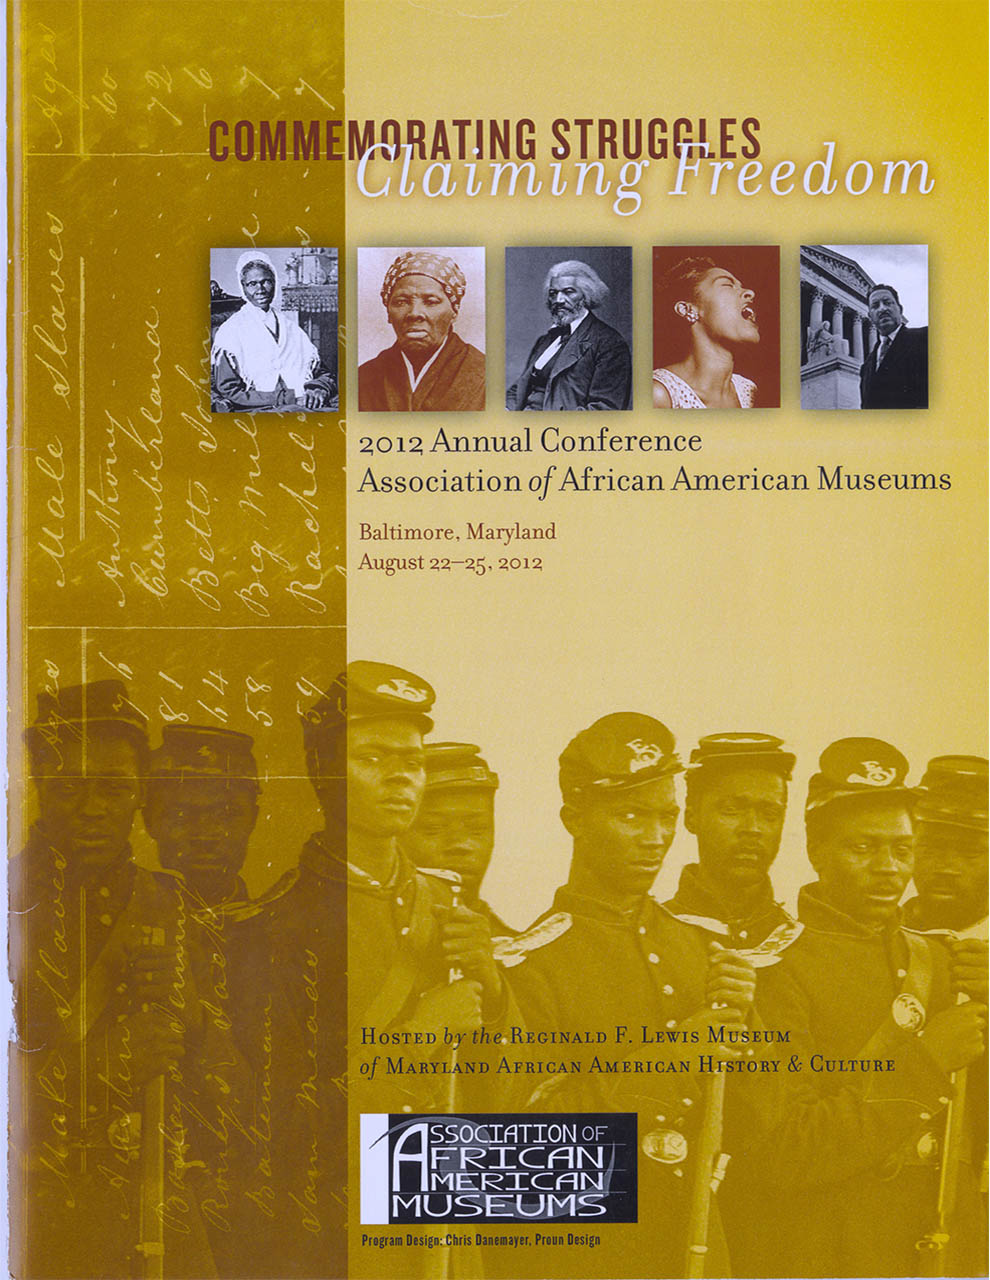 AAAM 2012 conference booklet cover